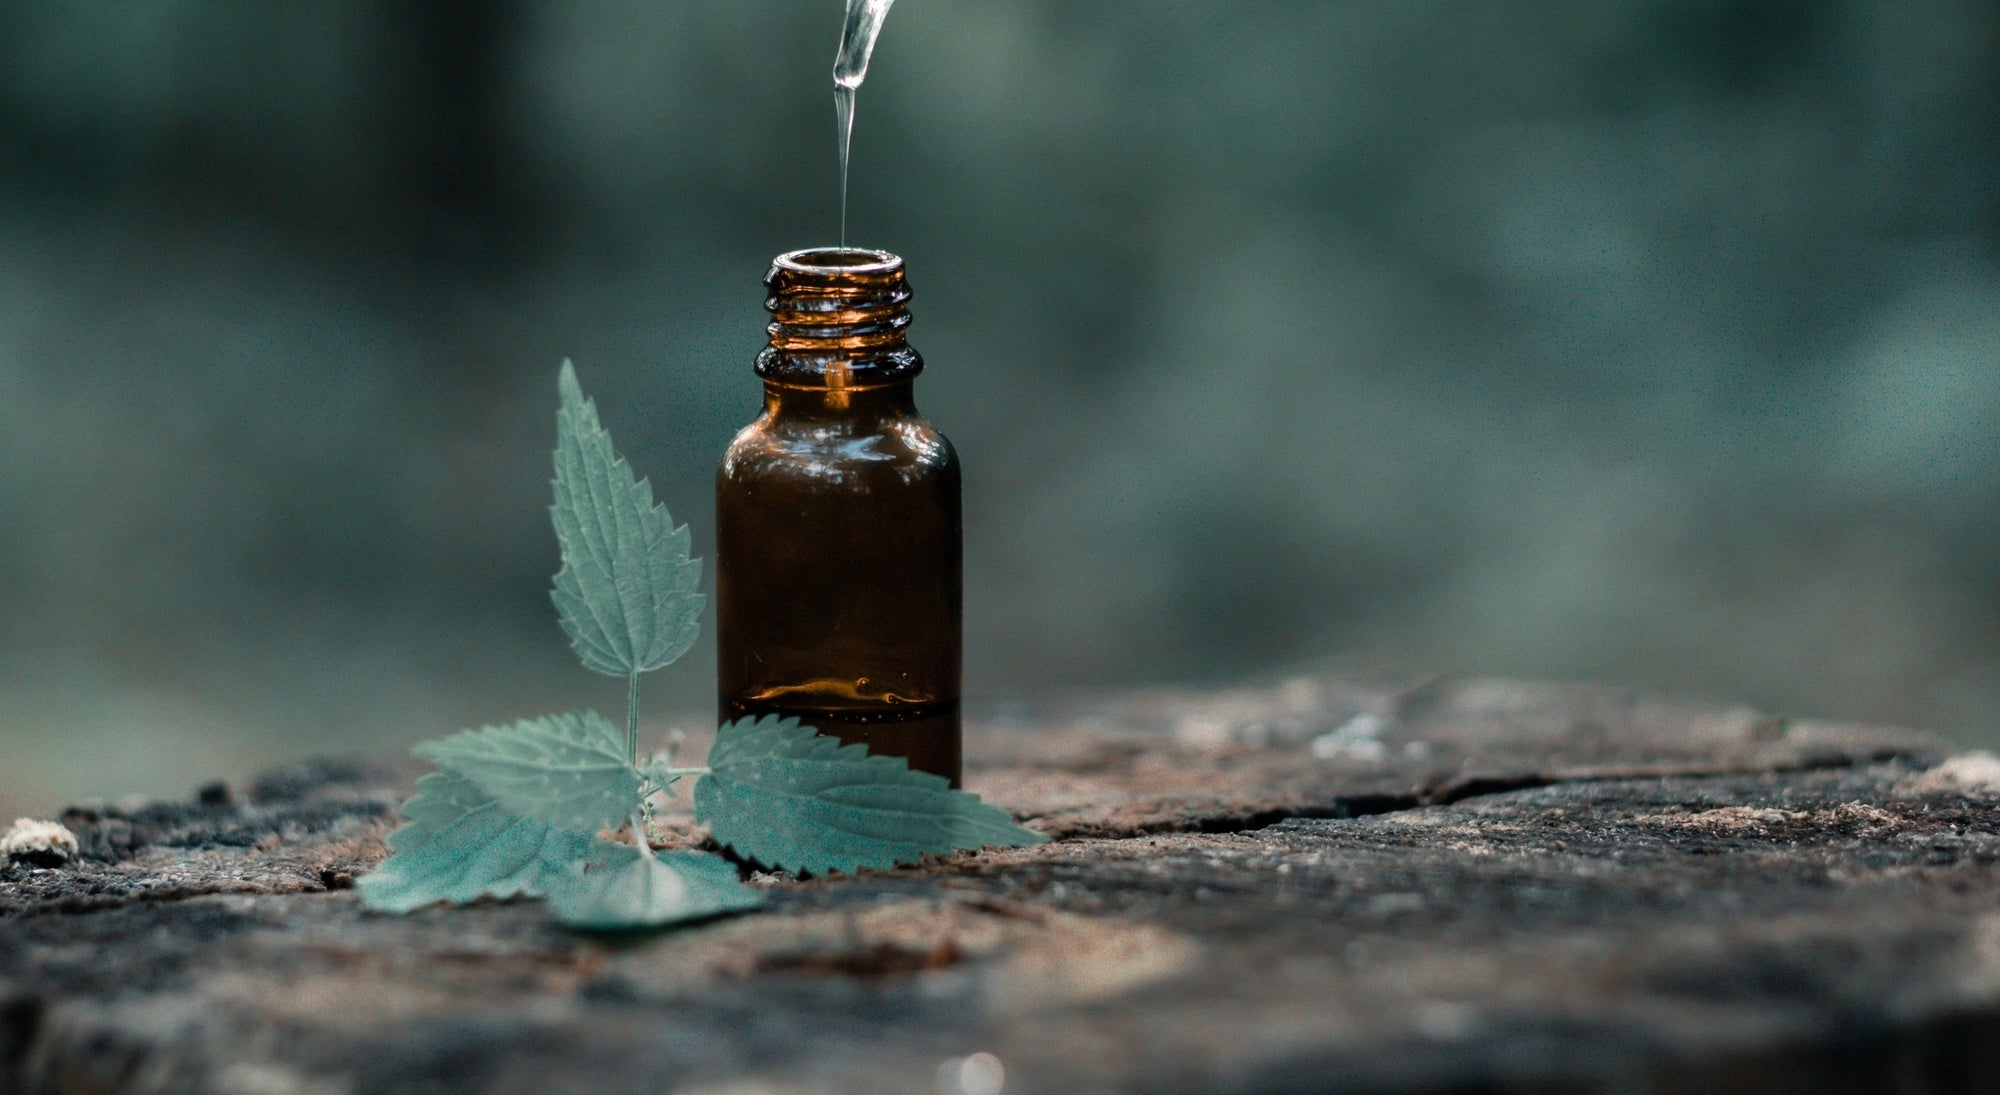 Debunking Common Misconceptions About Essential Oils